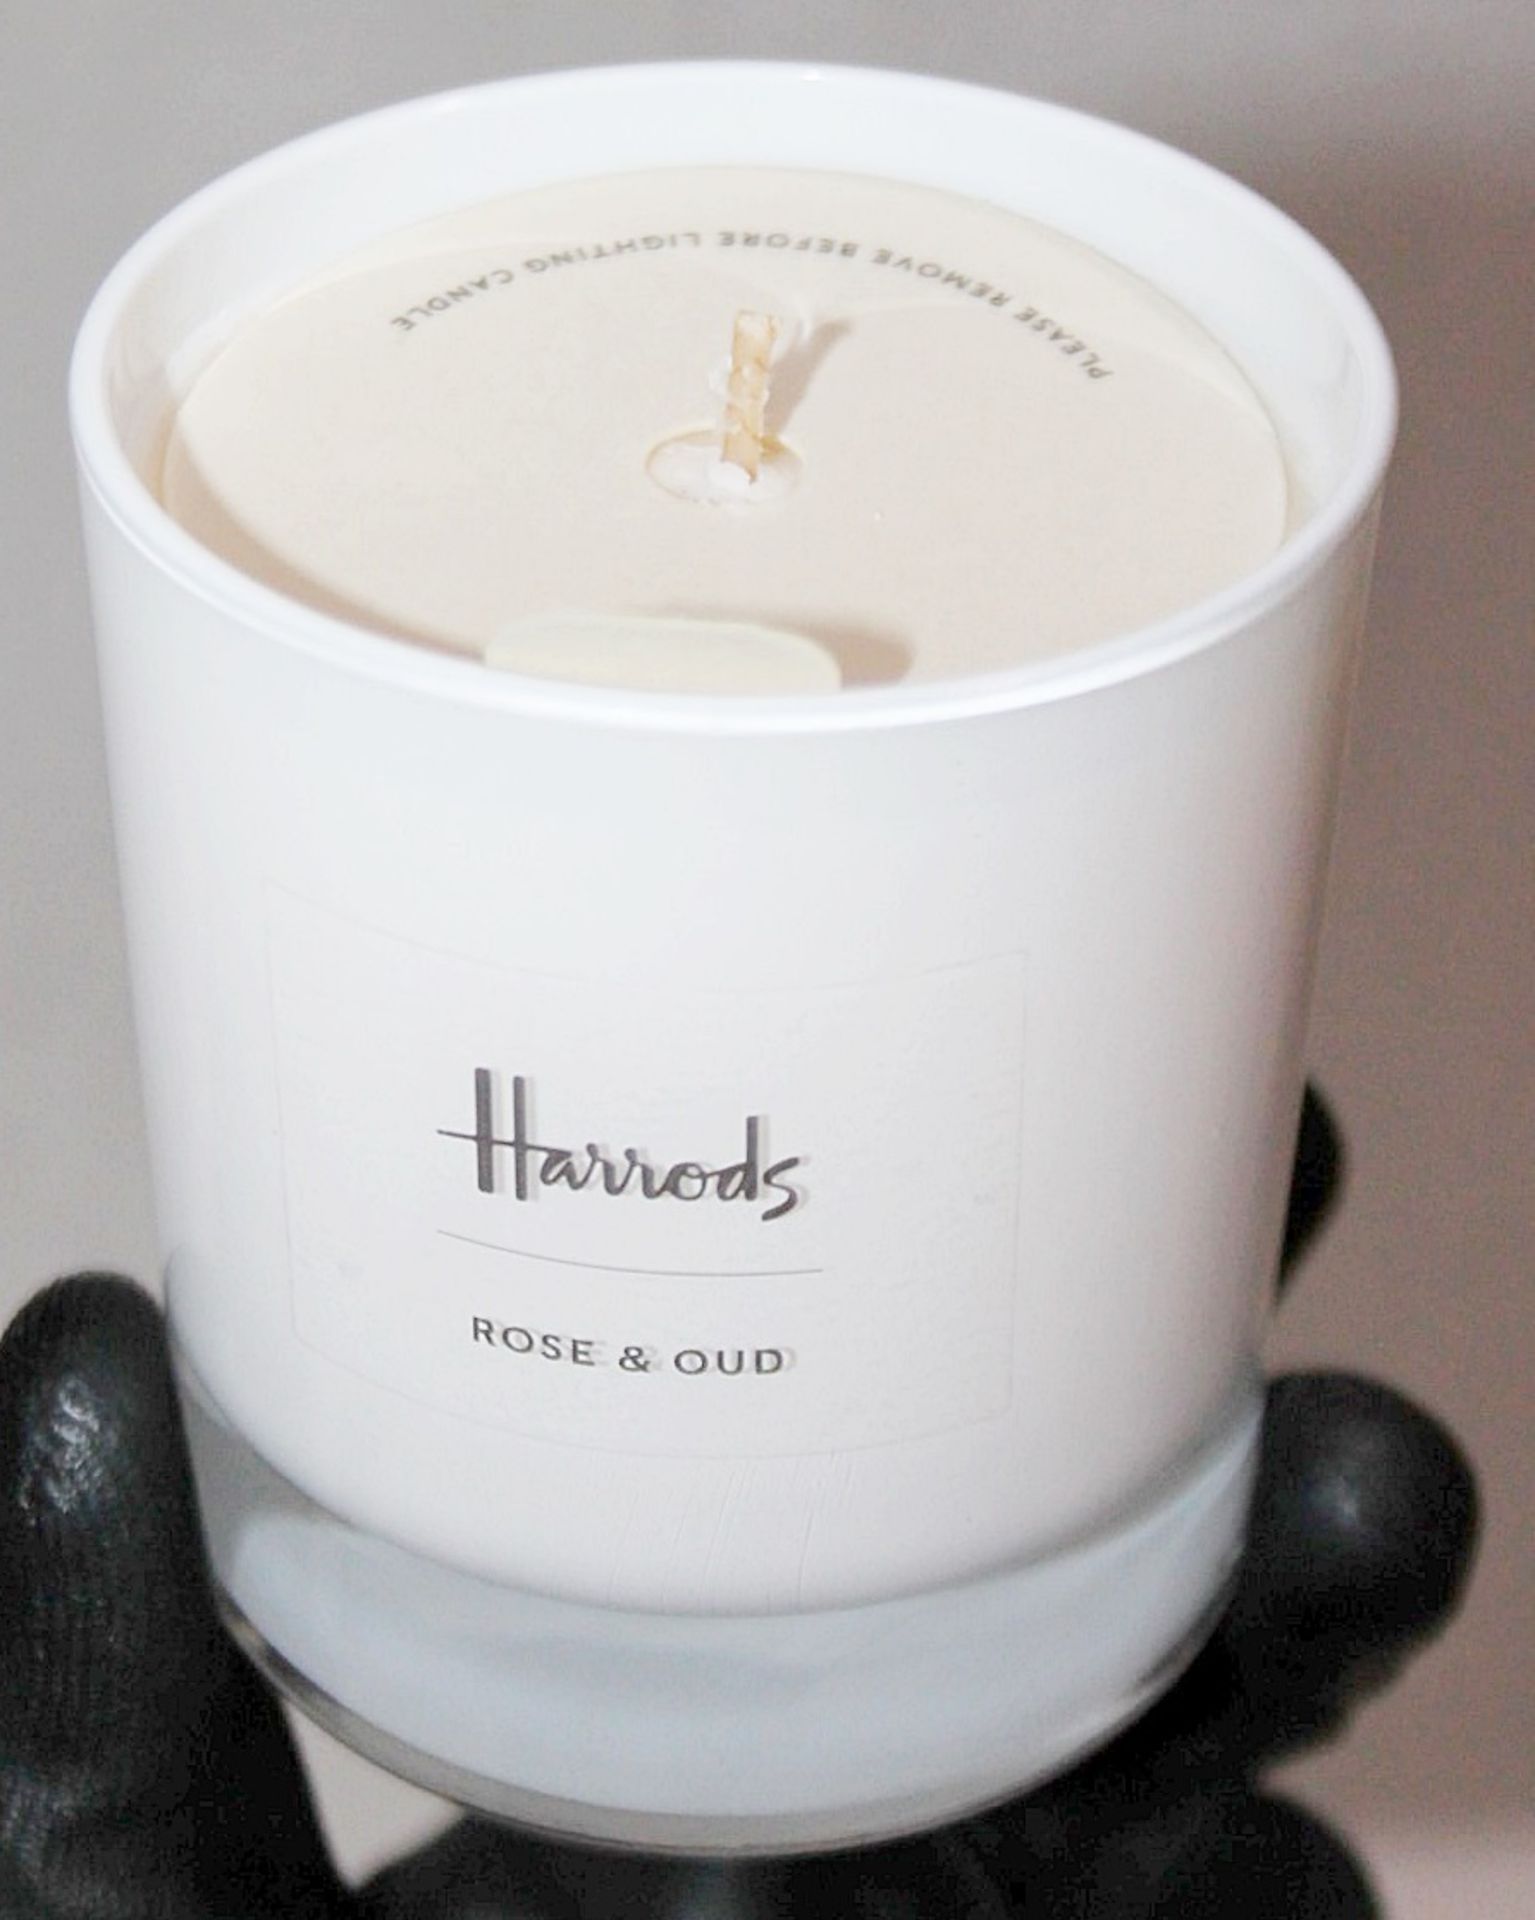 1 x HARRODS Rose And Oud Candle (230g) - Original Price £35.00 - Unused Boxed Stock - Image 2 of 6